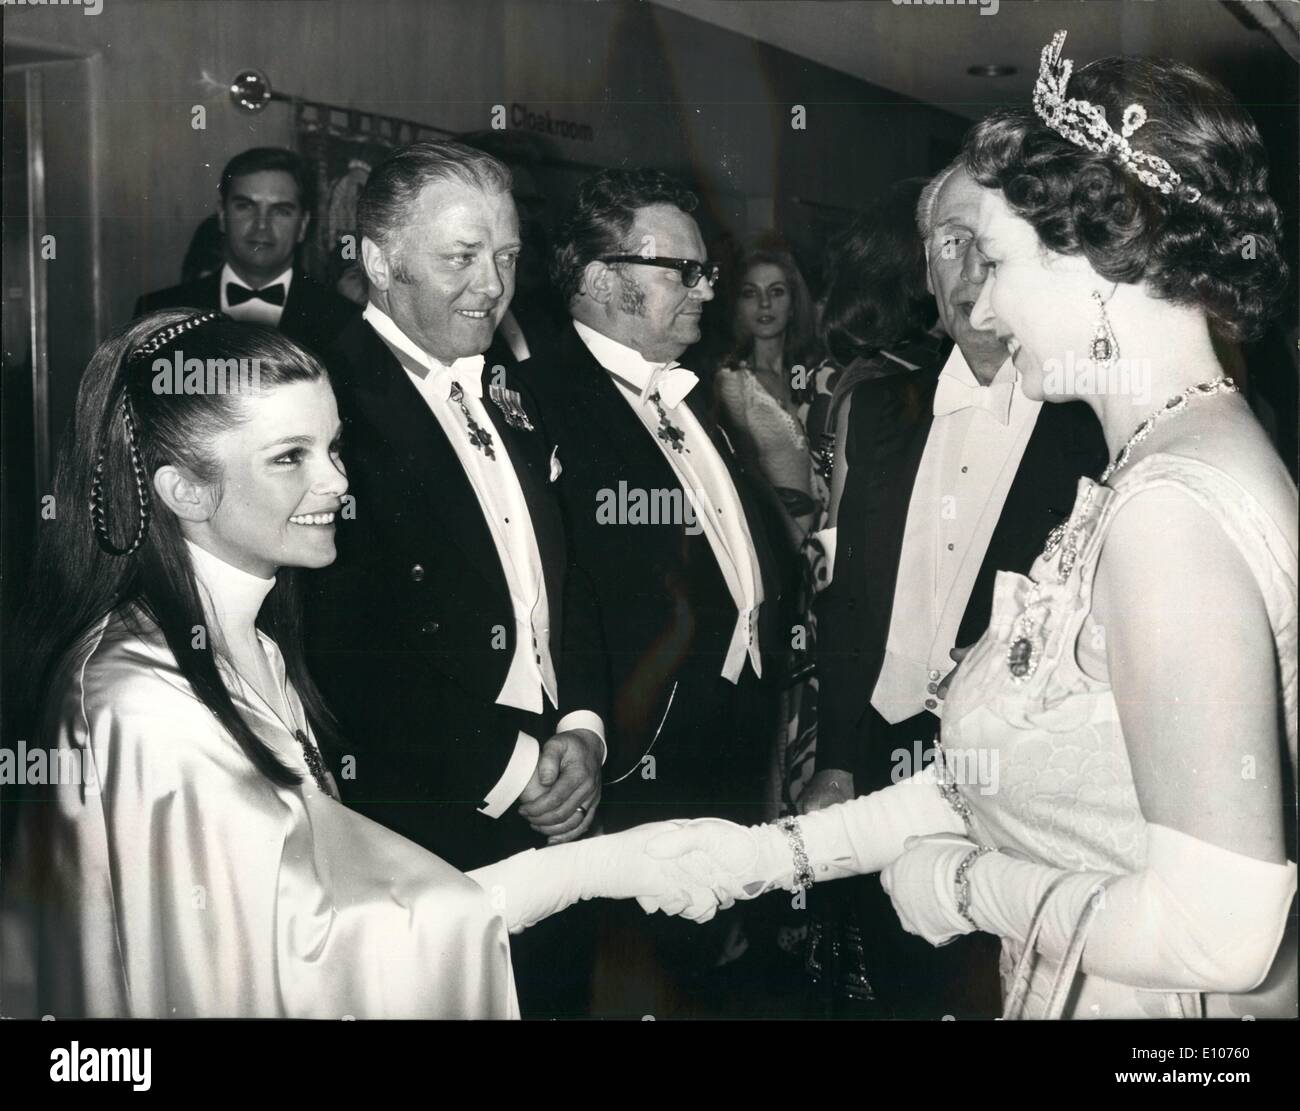 Feb. 02, 1970 - Royal film performance. H.M. The Queen talking to Genevieve Bujold, who plays Anne Boleyn in ''Anne of the Thousand Days'', before the Royal Film performance at the Odeon, Leicester Square, London, last night. In the background are Actor/Director Richard Attenborough (left) and Singer/Comedian Harry Secombe. The Royal Film Performance is in aid of the Cinema and Television Benevolent Fund. Stock Photo